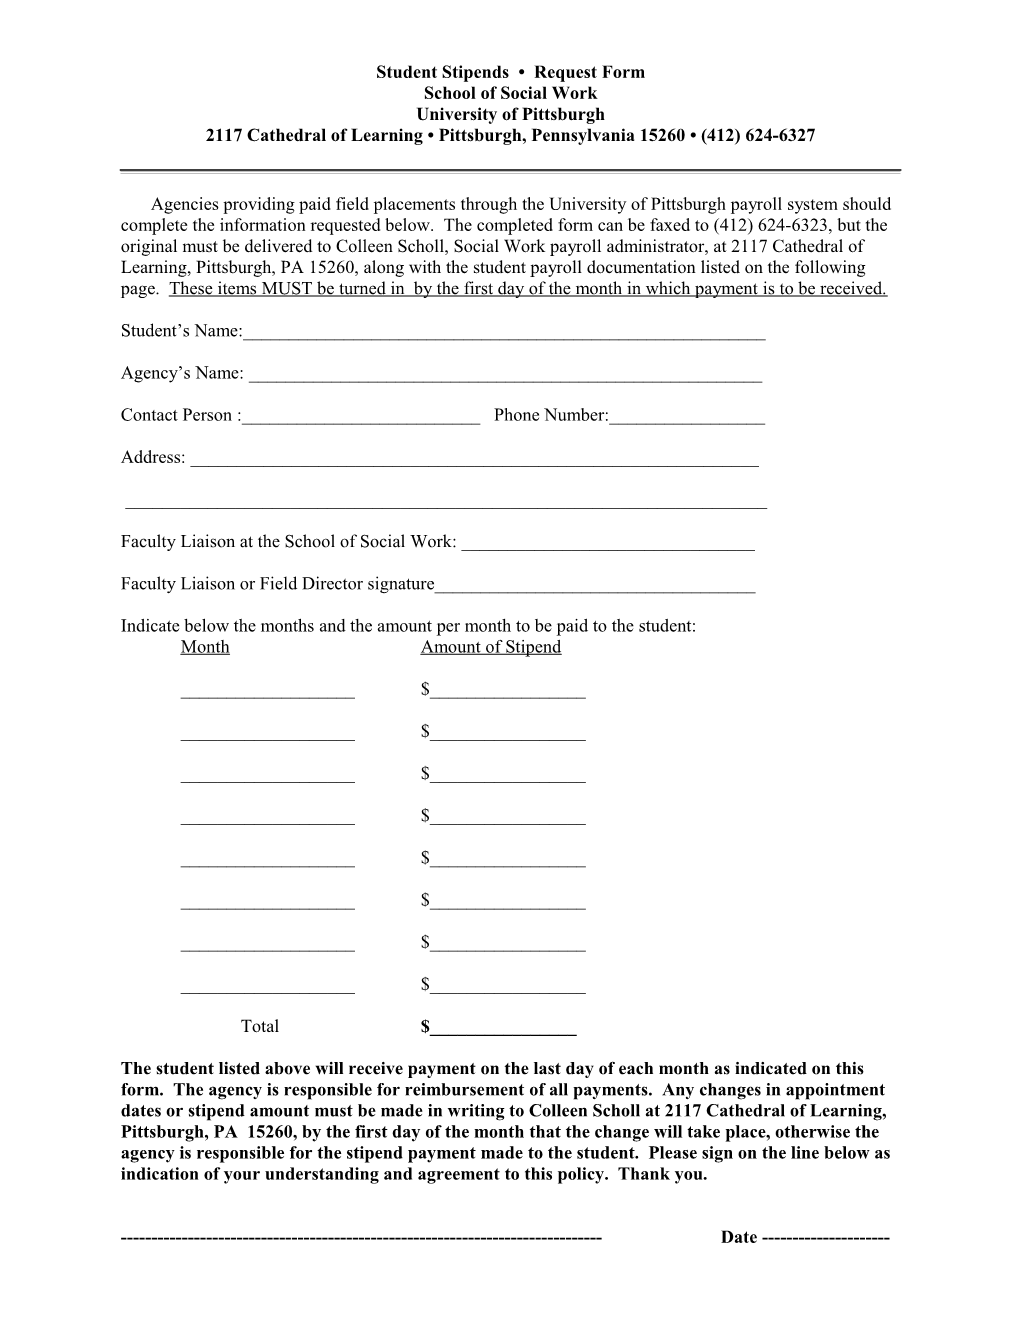 Student Stipends Request Form